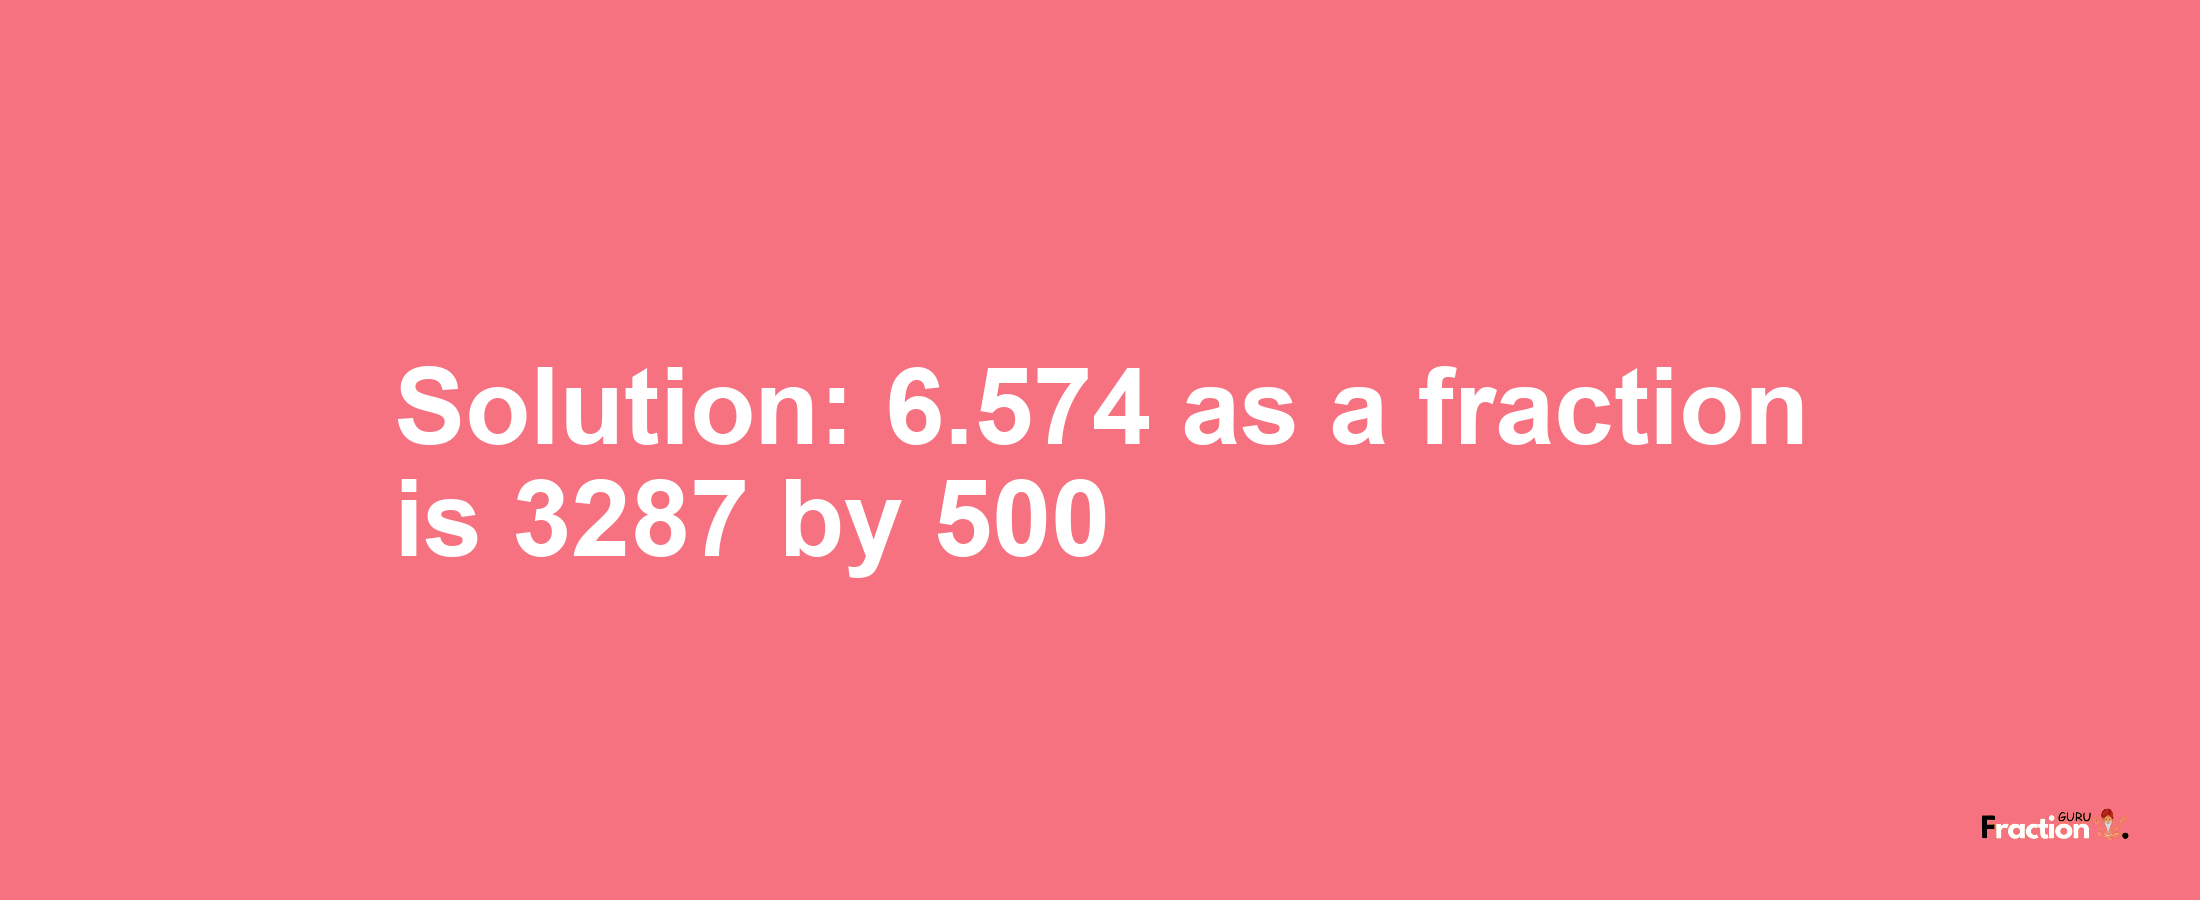 Solution:6.574 as a fraction is 3287/500